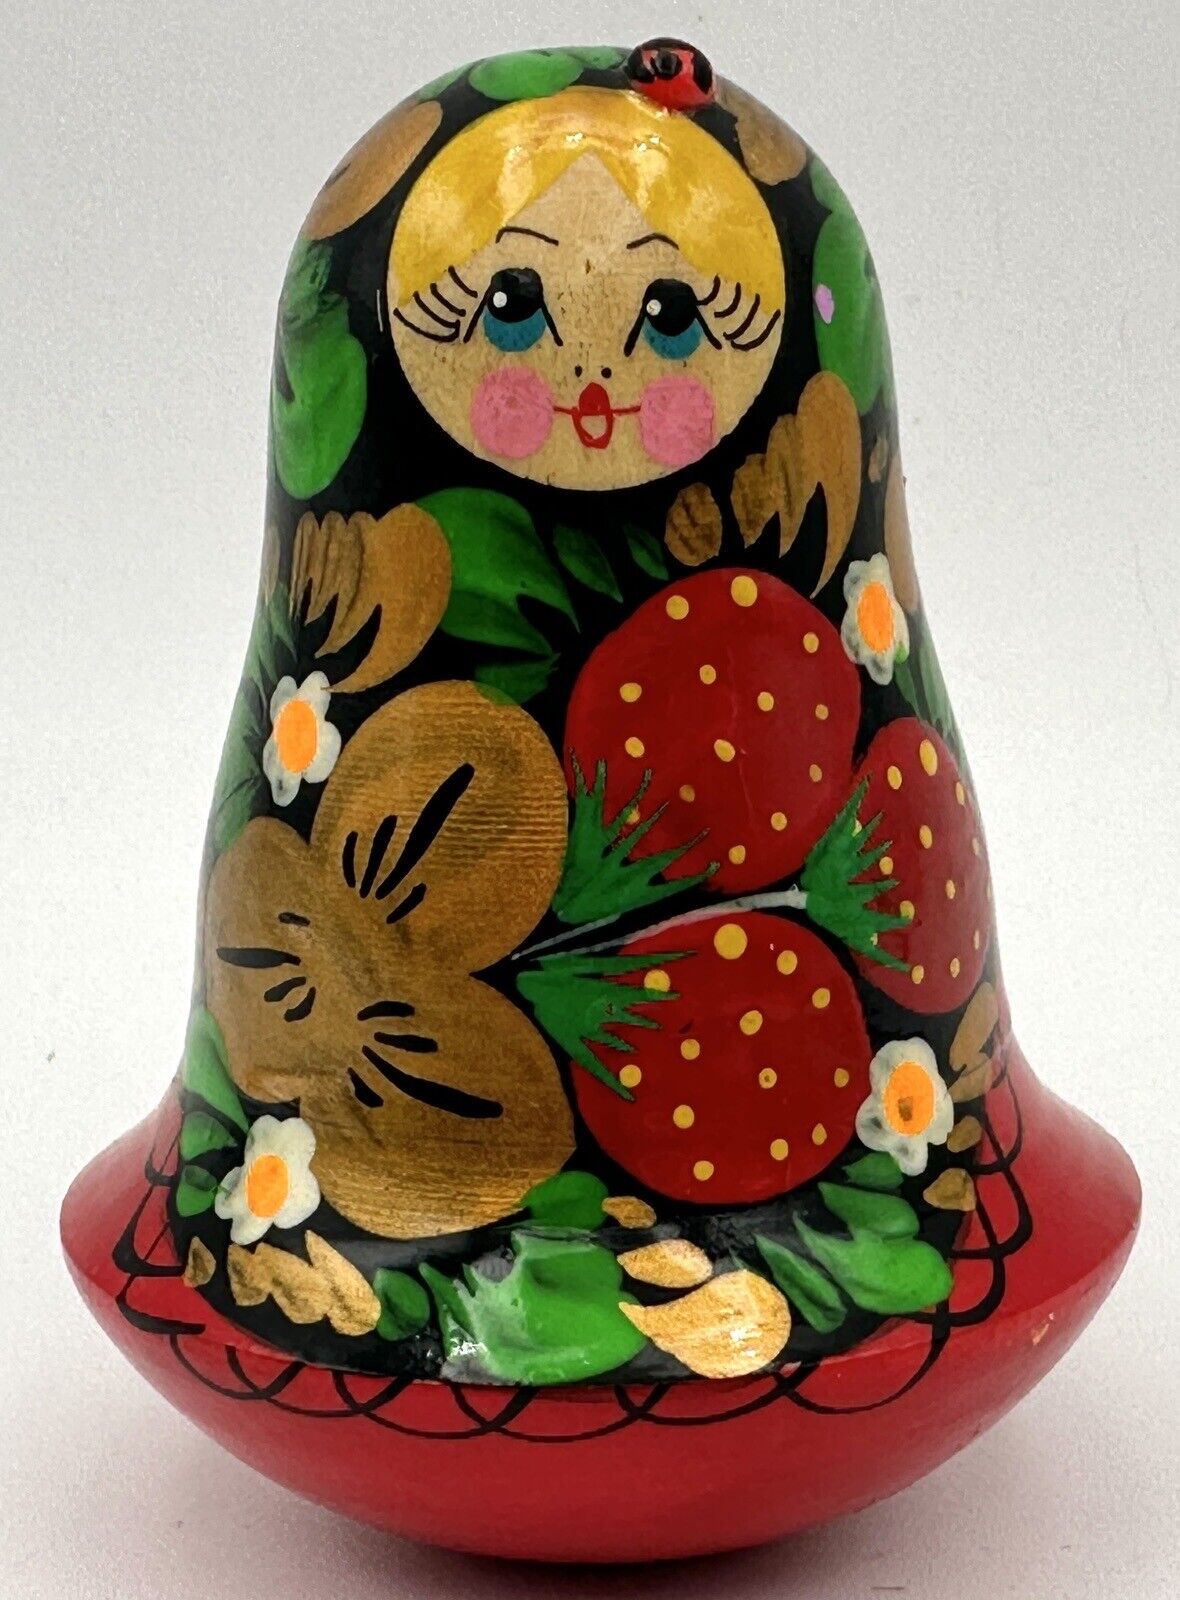 Wooden Russian Matryoshka Doll Roly Poly Chime Bell Painted Strawberries Ladybug